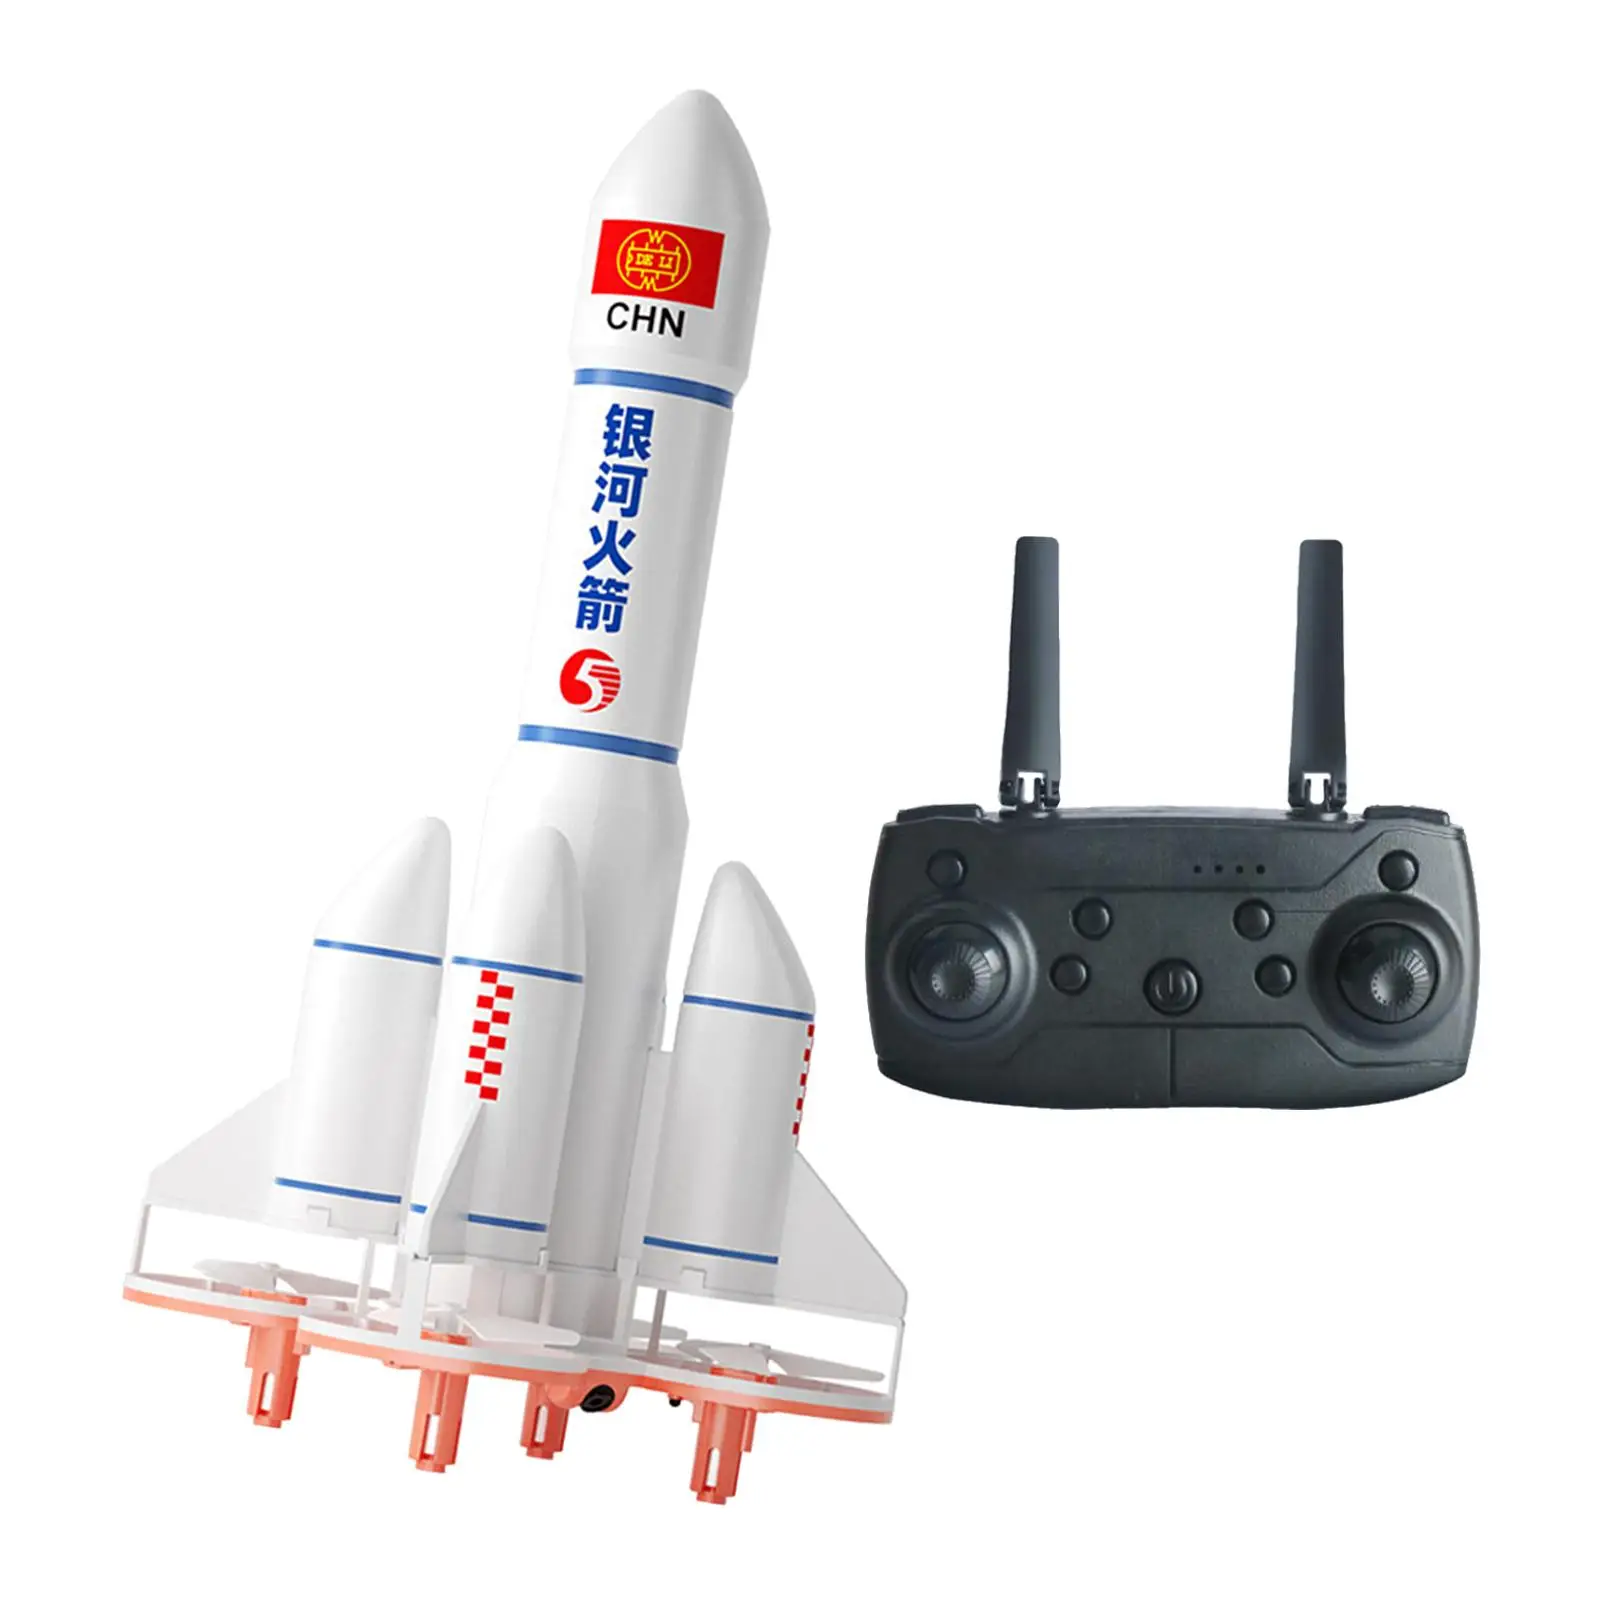 RC Drone Space Shuttle 4 Turbofan Easy Control with Battery Remote Control Plane RC Flying Toys RC Space Rocket for Youth Teen